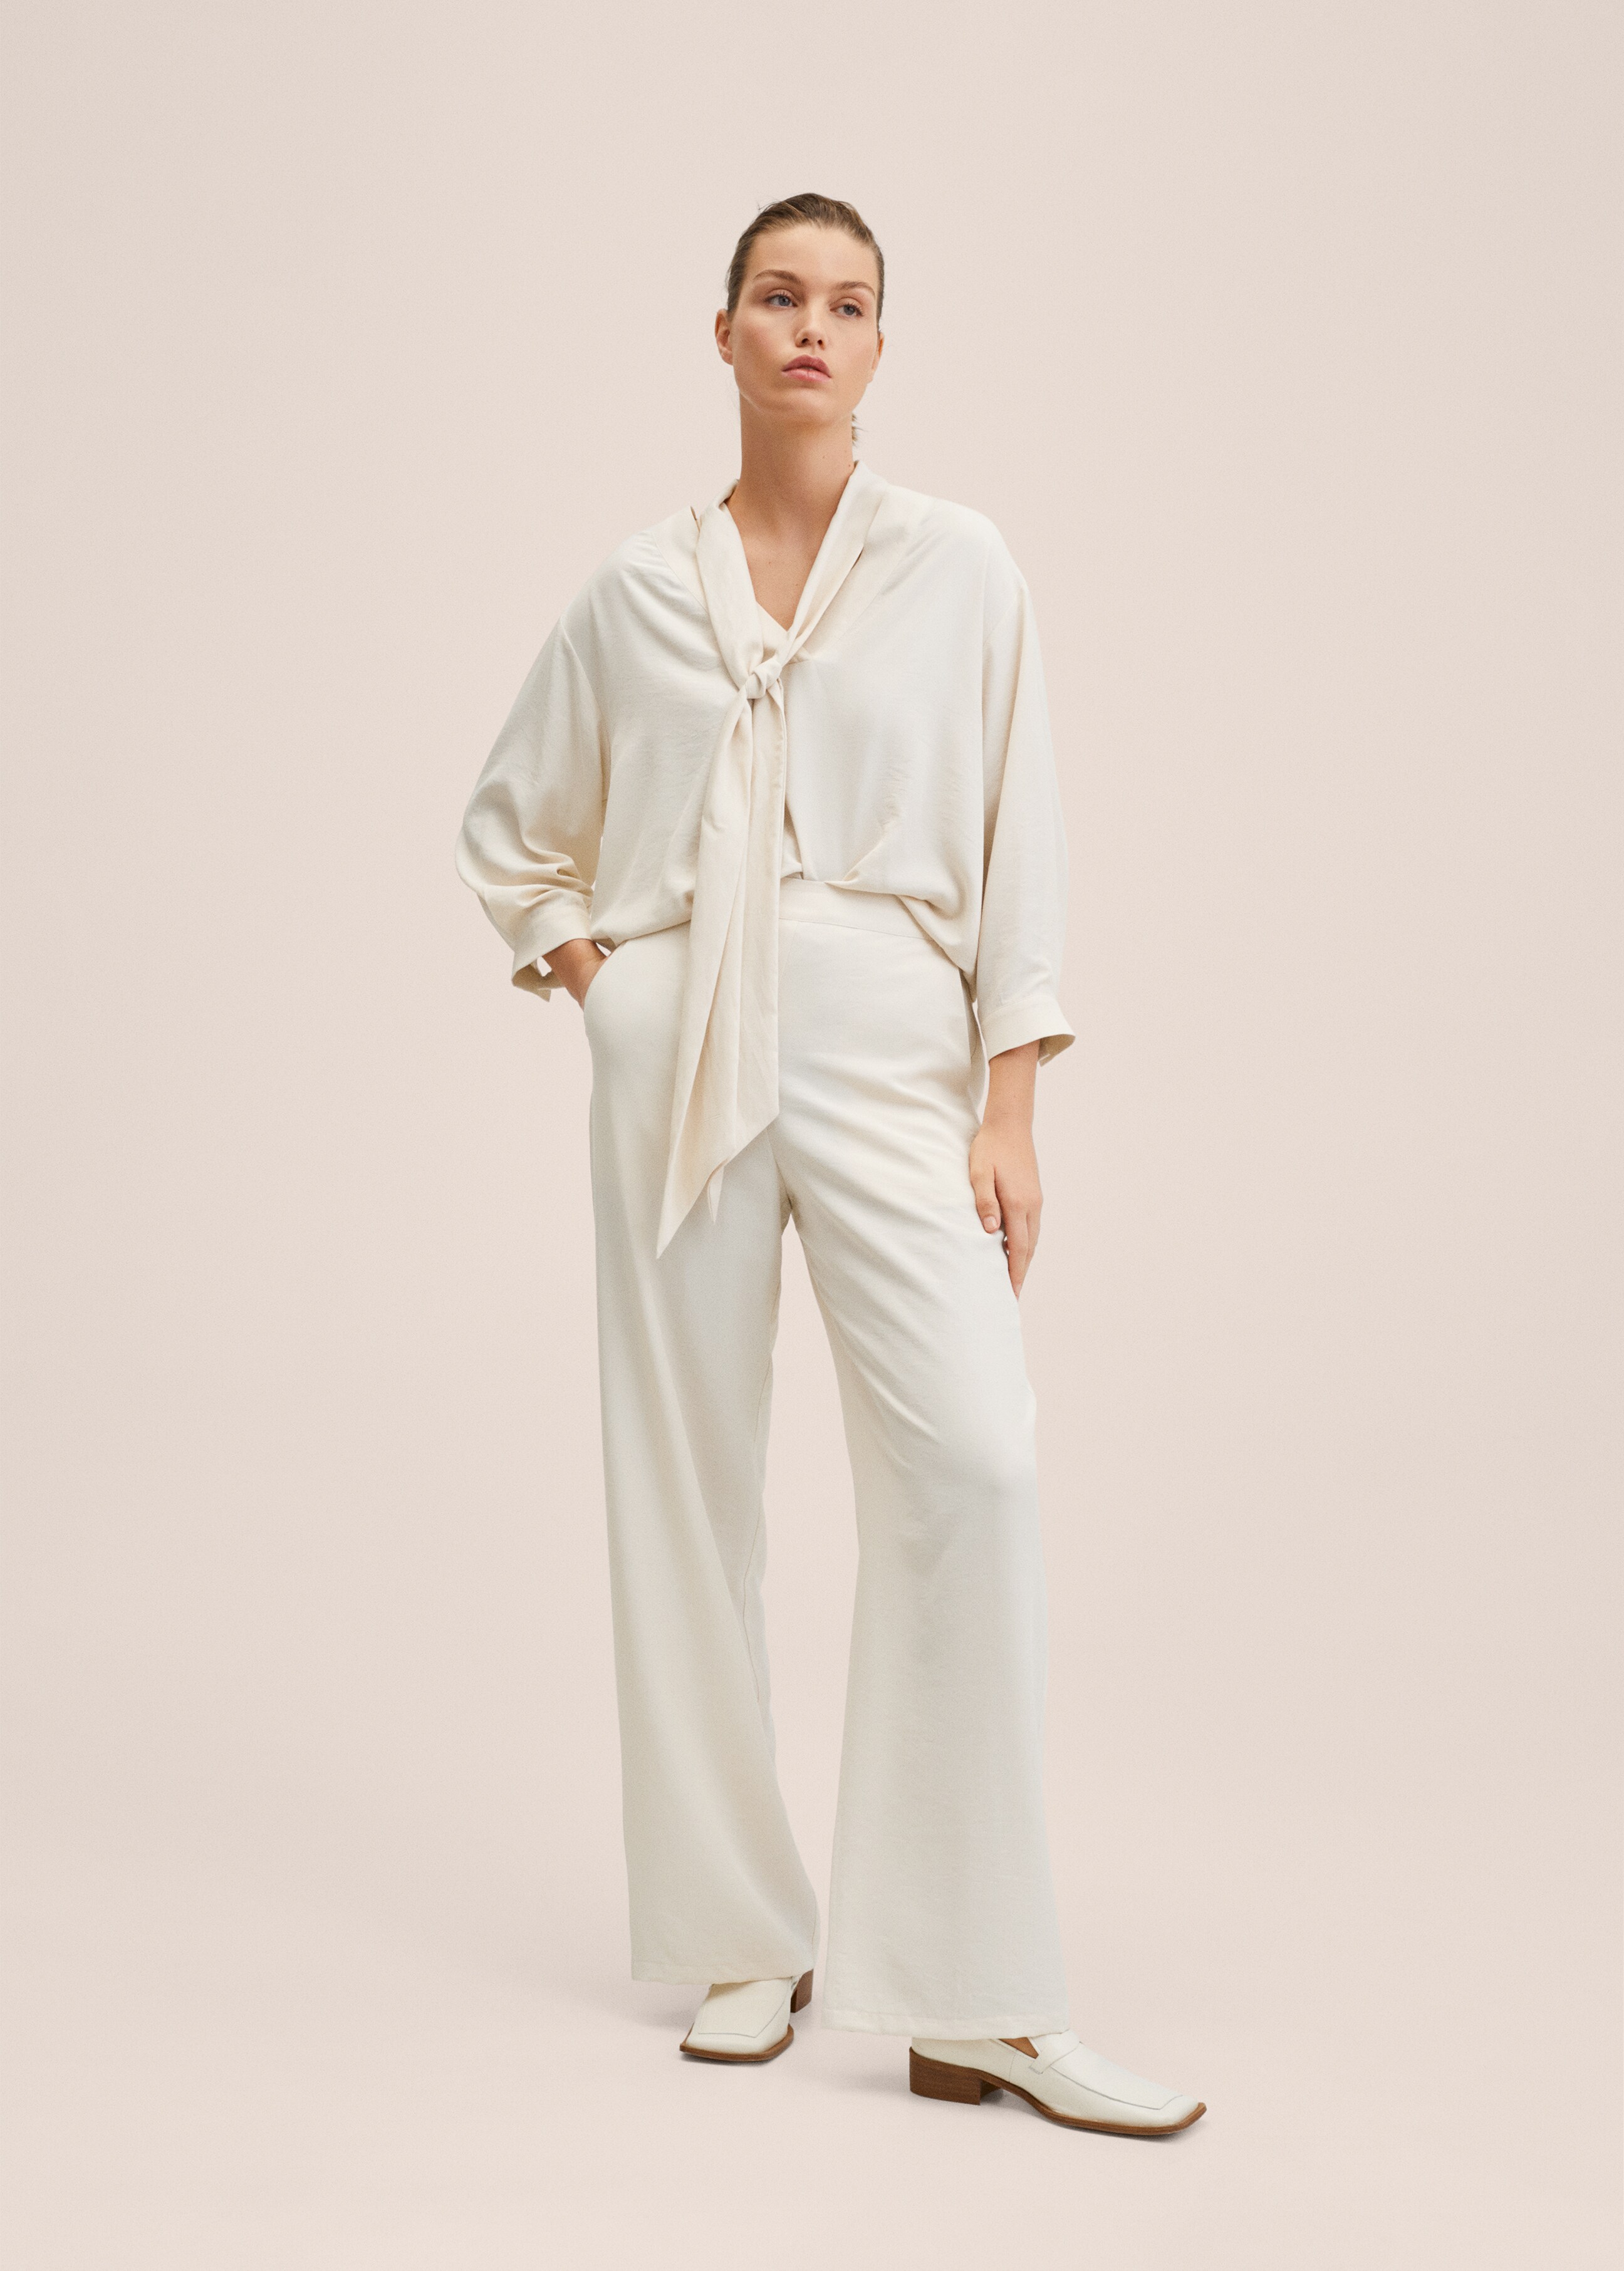 Textured flowy trousers - General plane